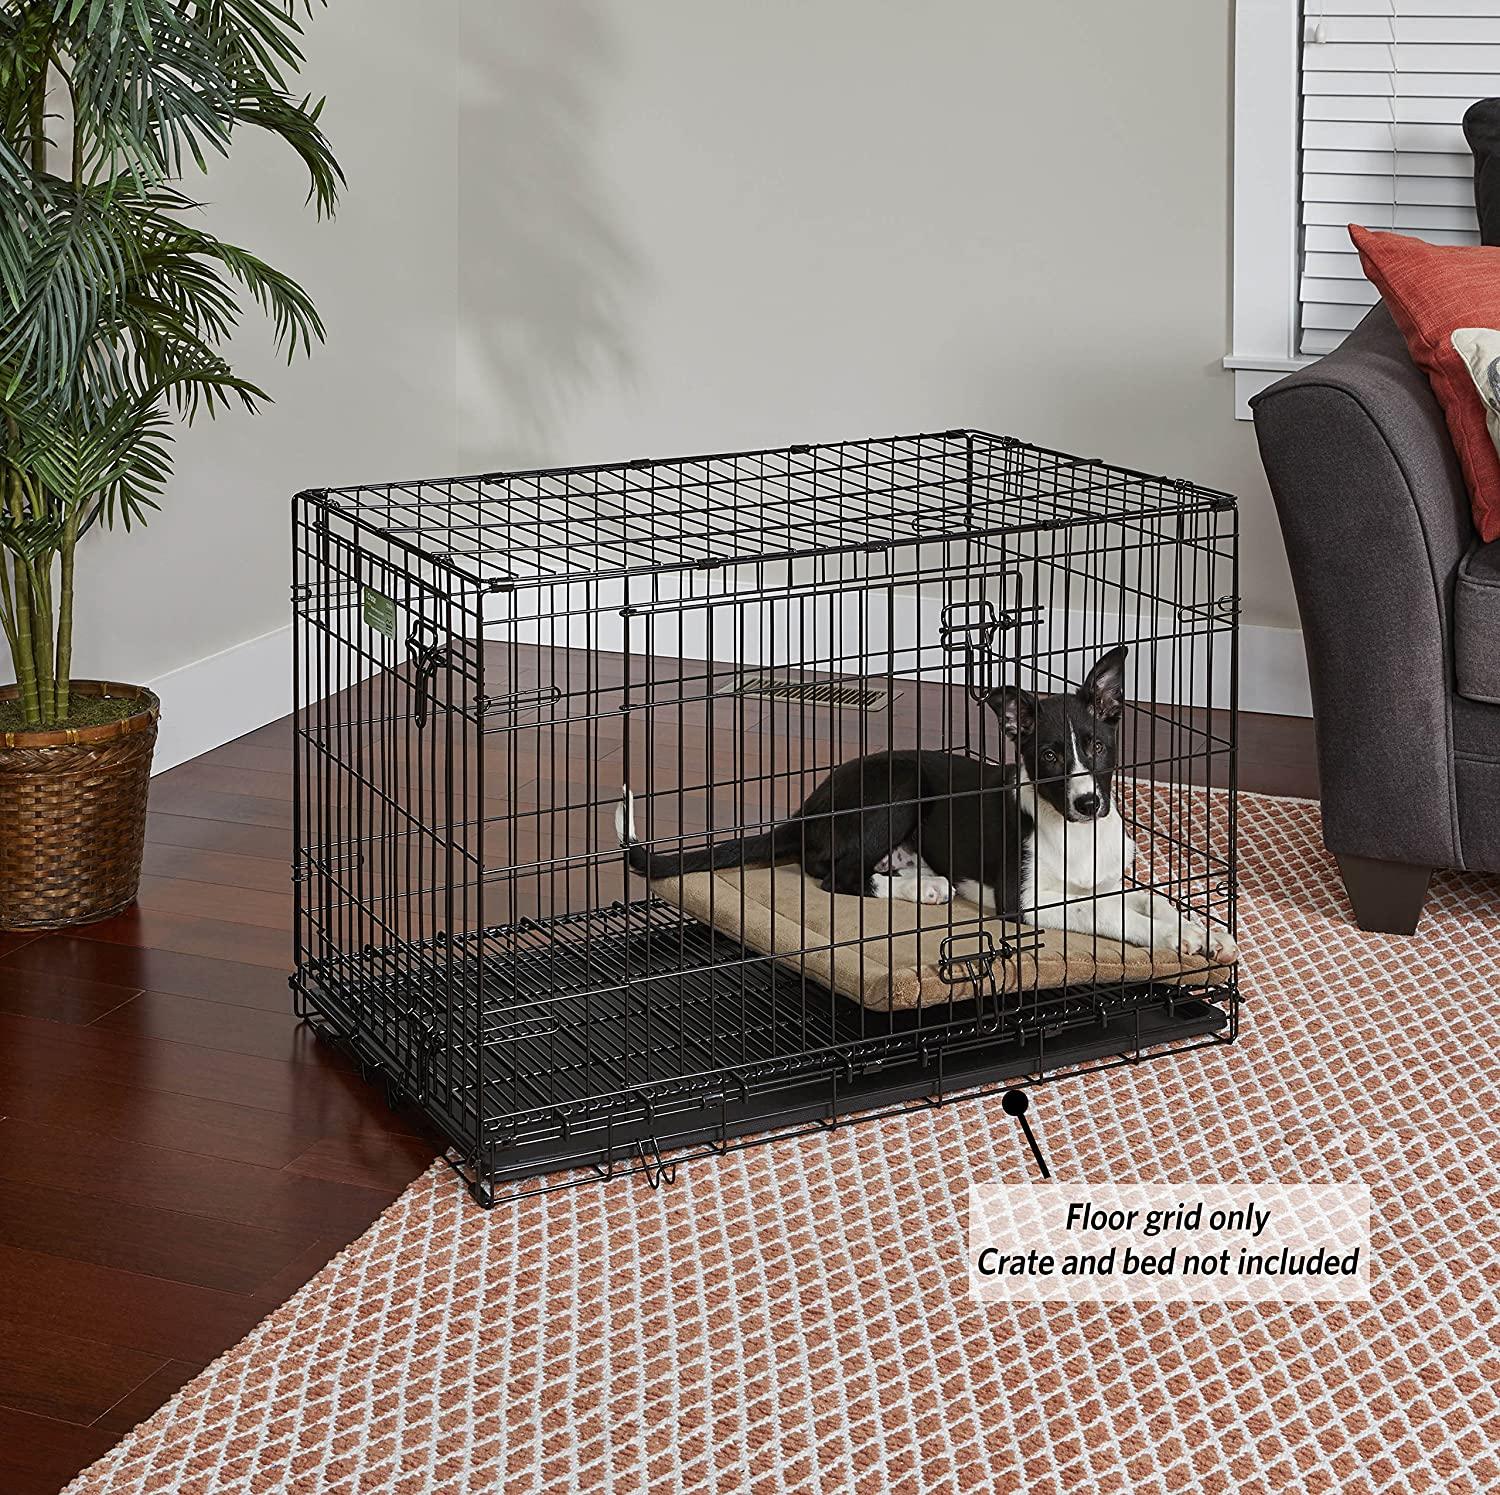 Dog Cage mats for flooring